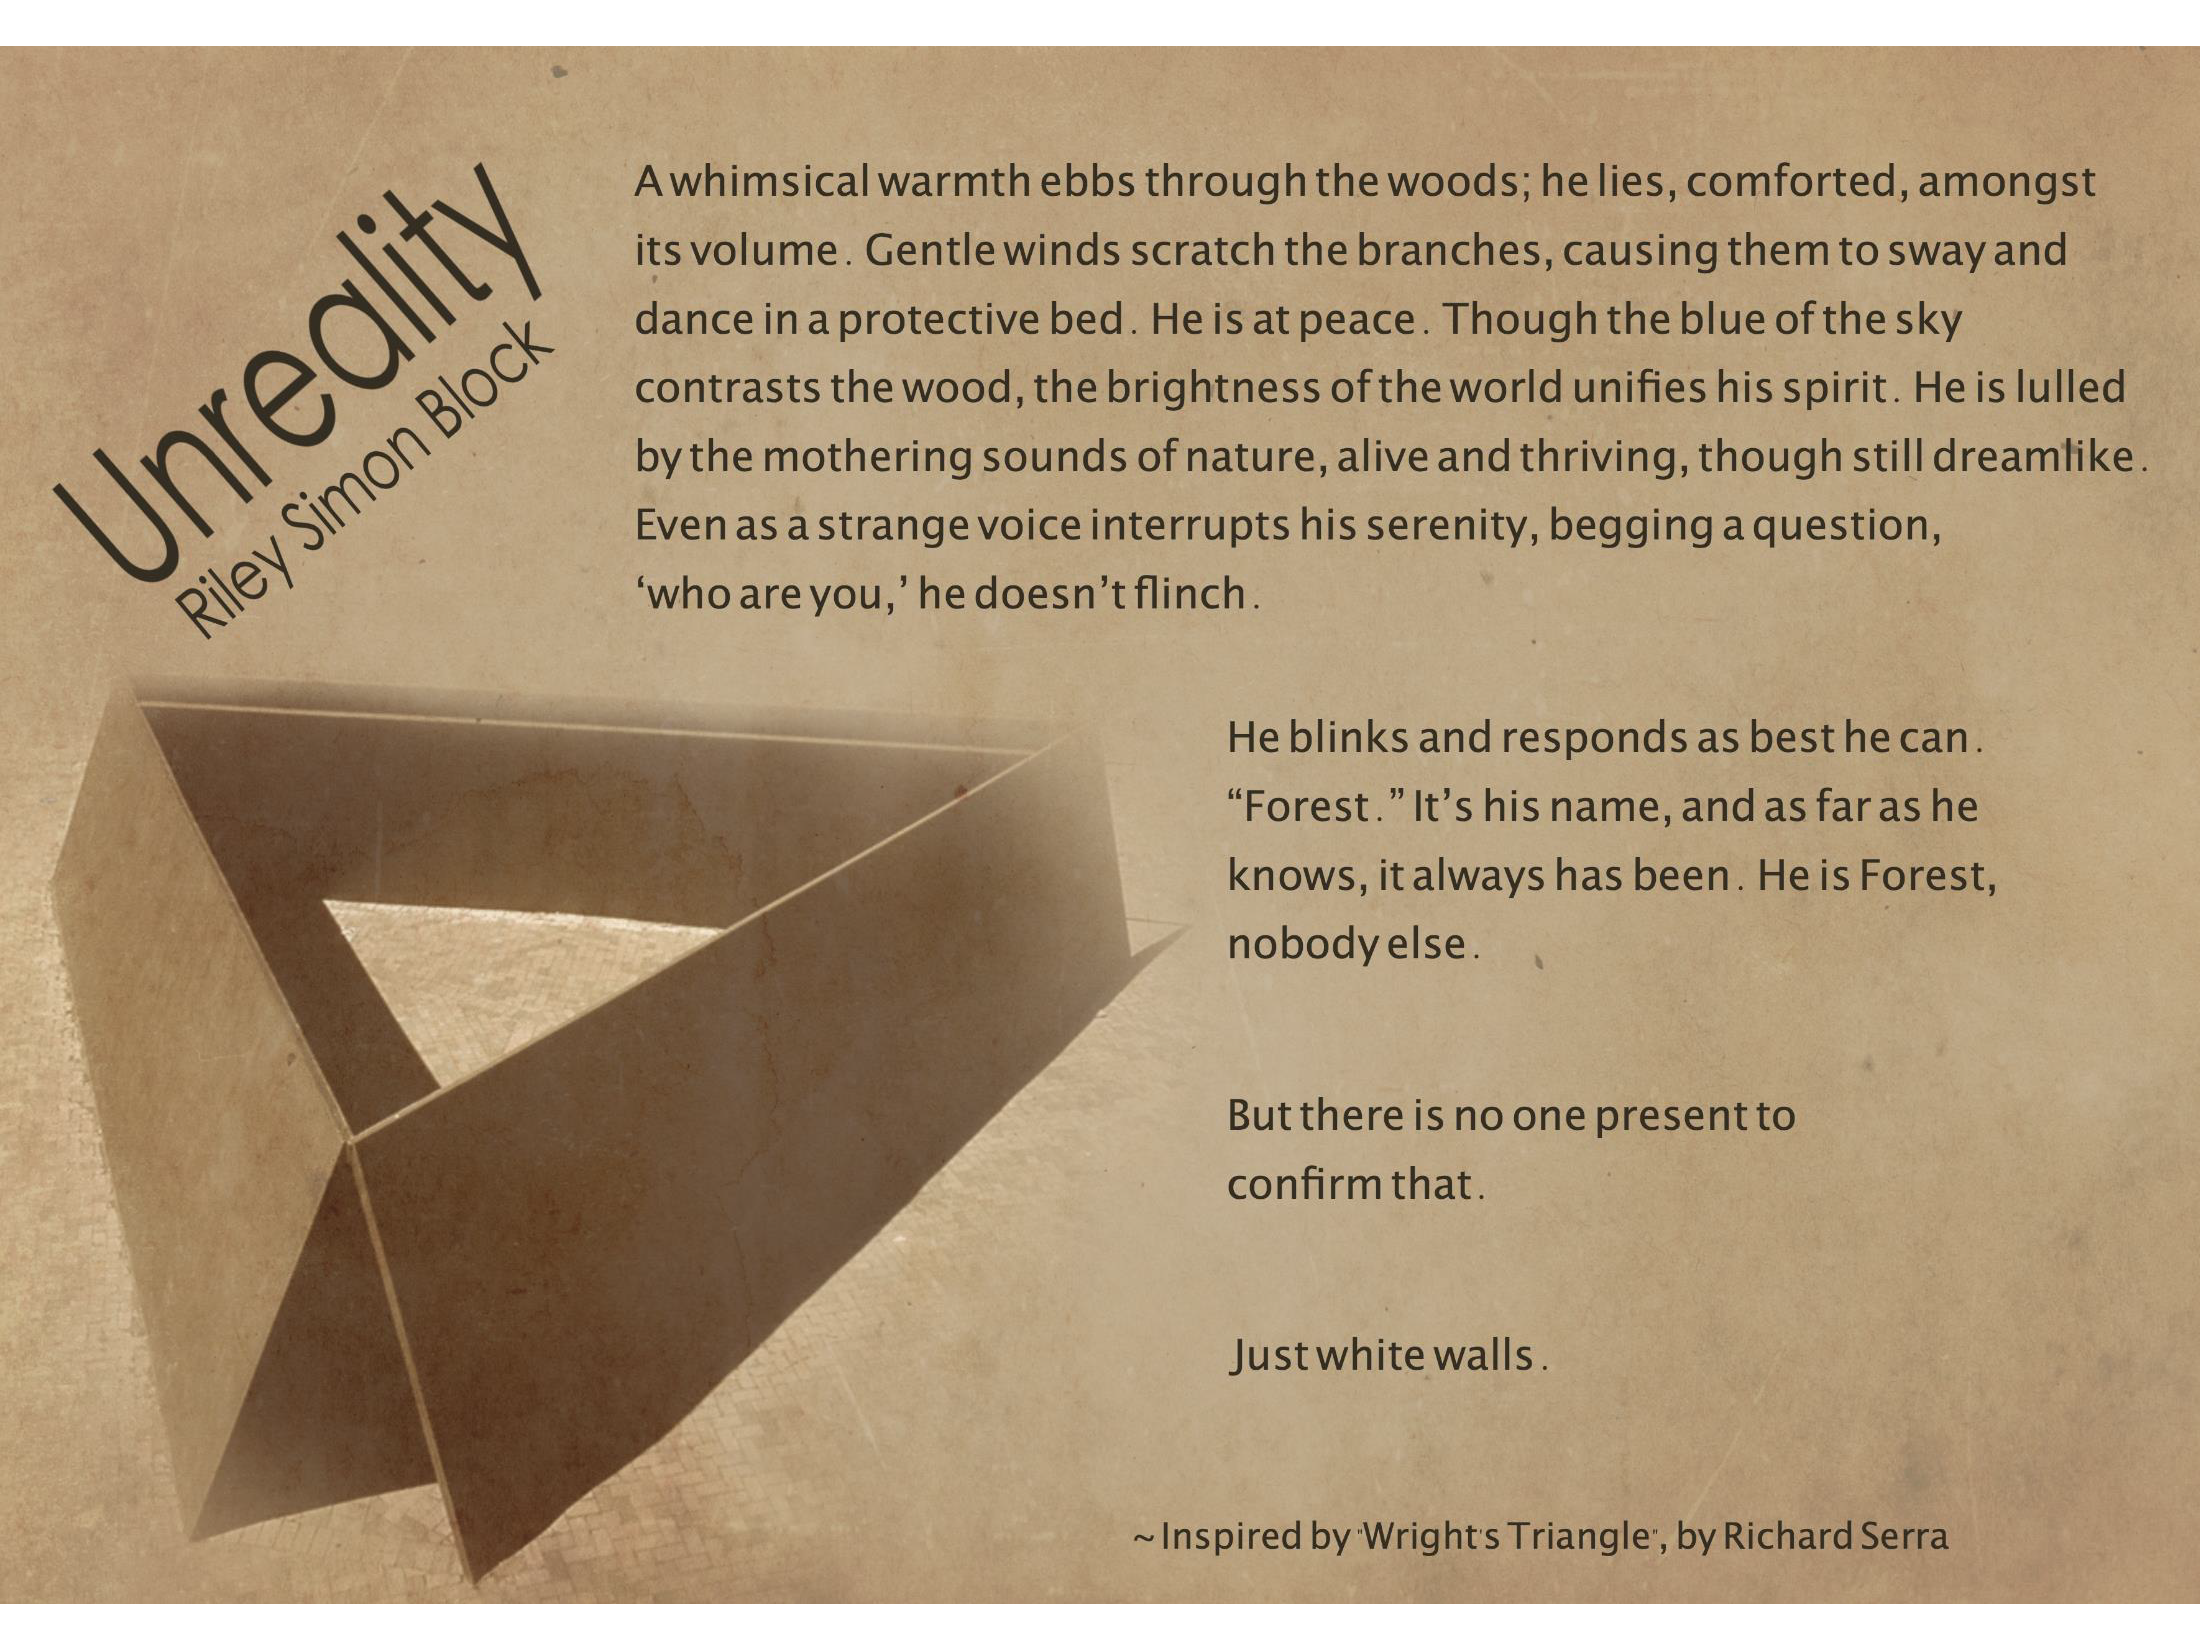 A poem wraps around a photo of the Wright's Triangle sculpture